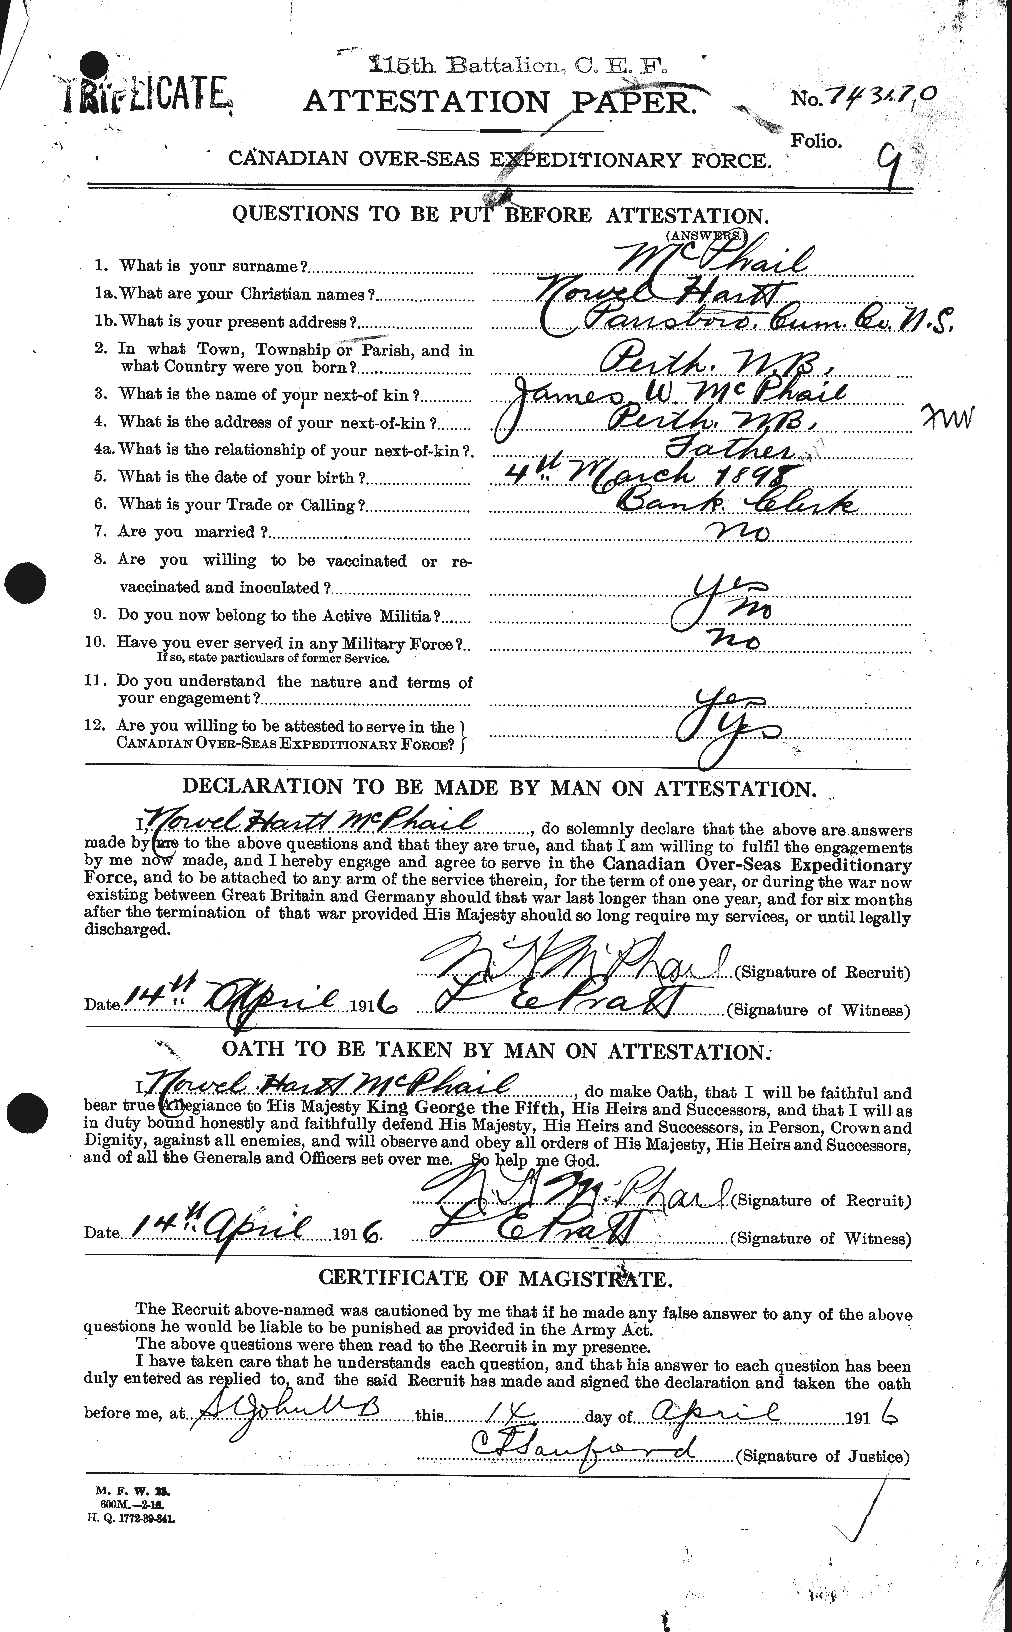 Personnel Records of the First World War - CEF 540906a